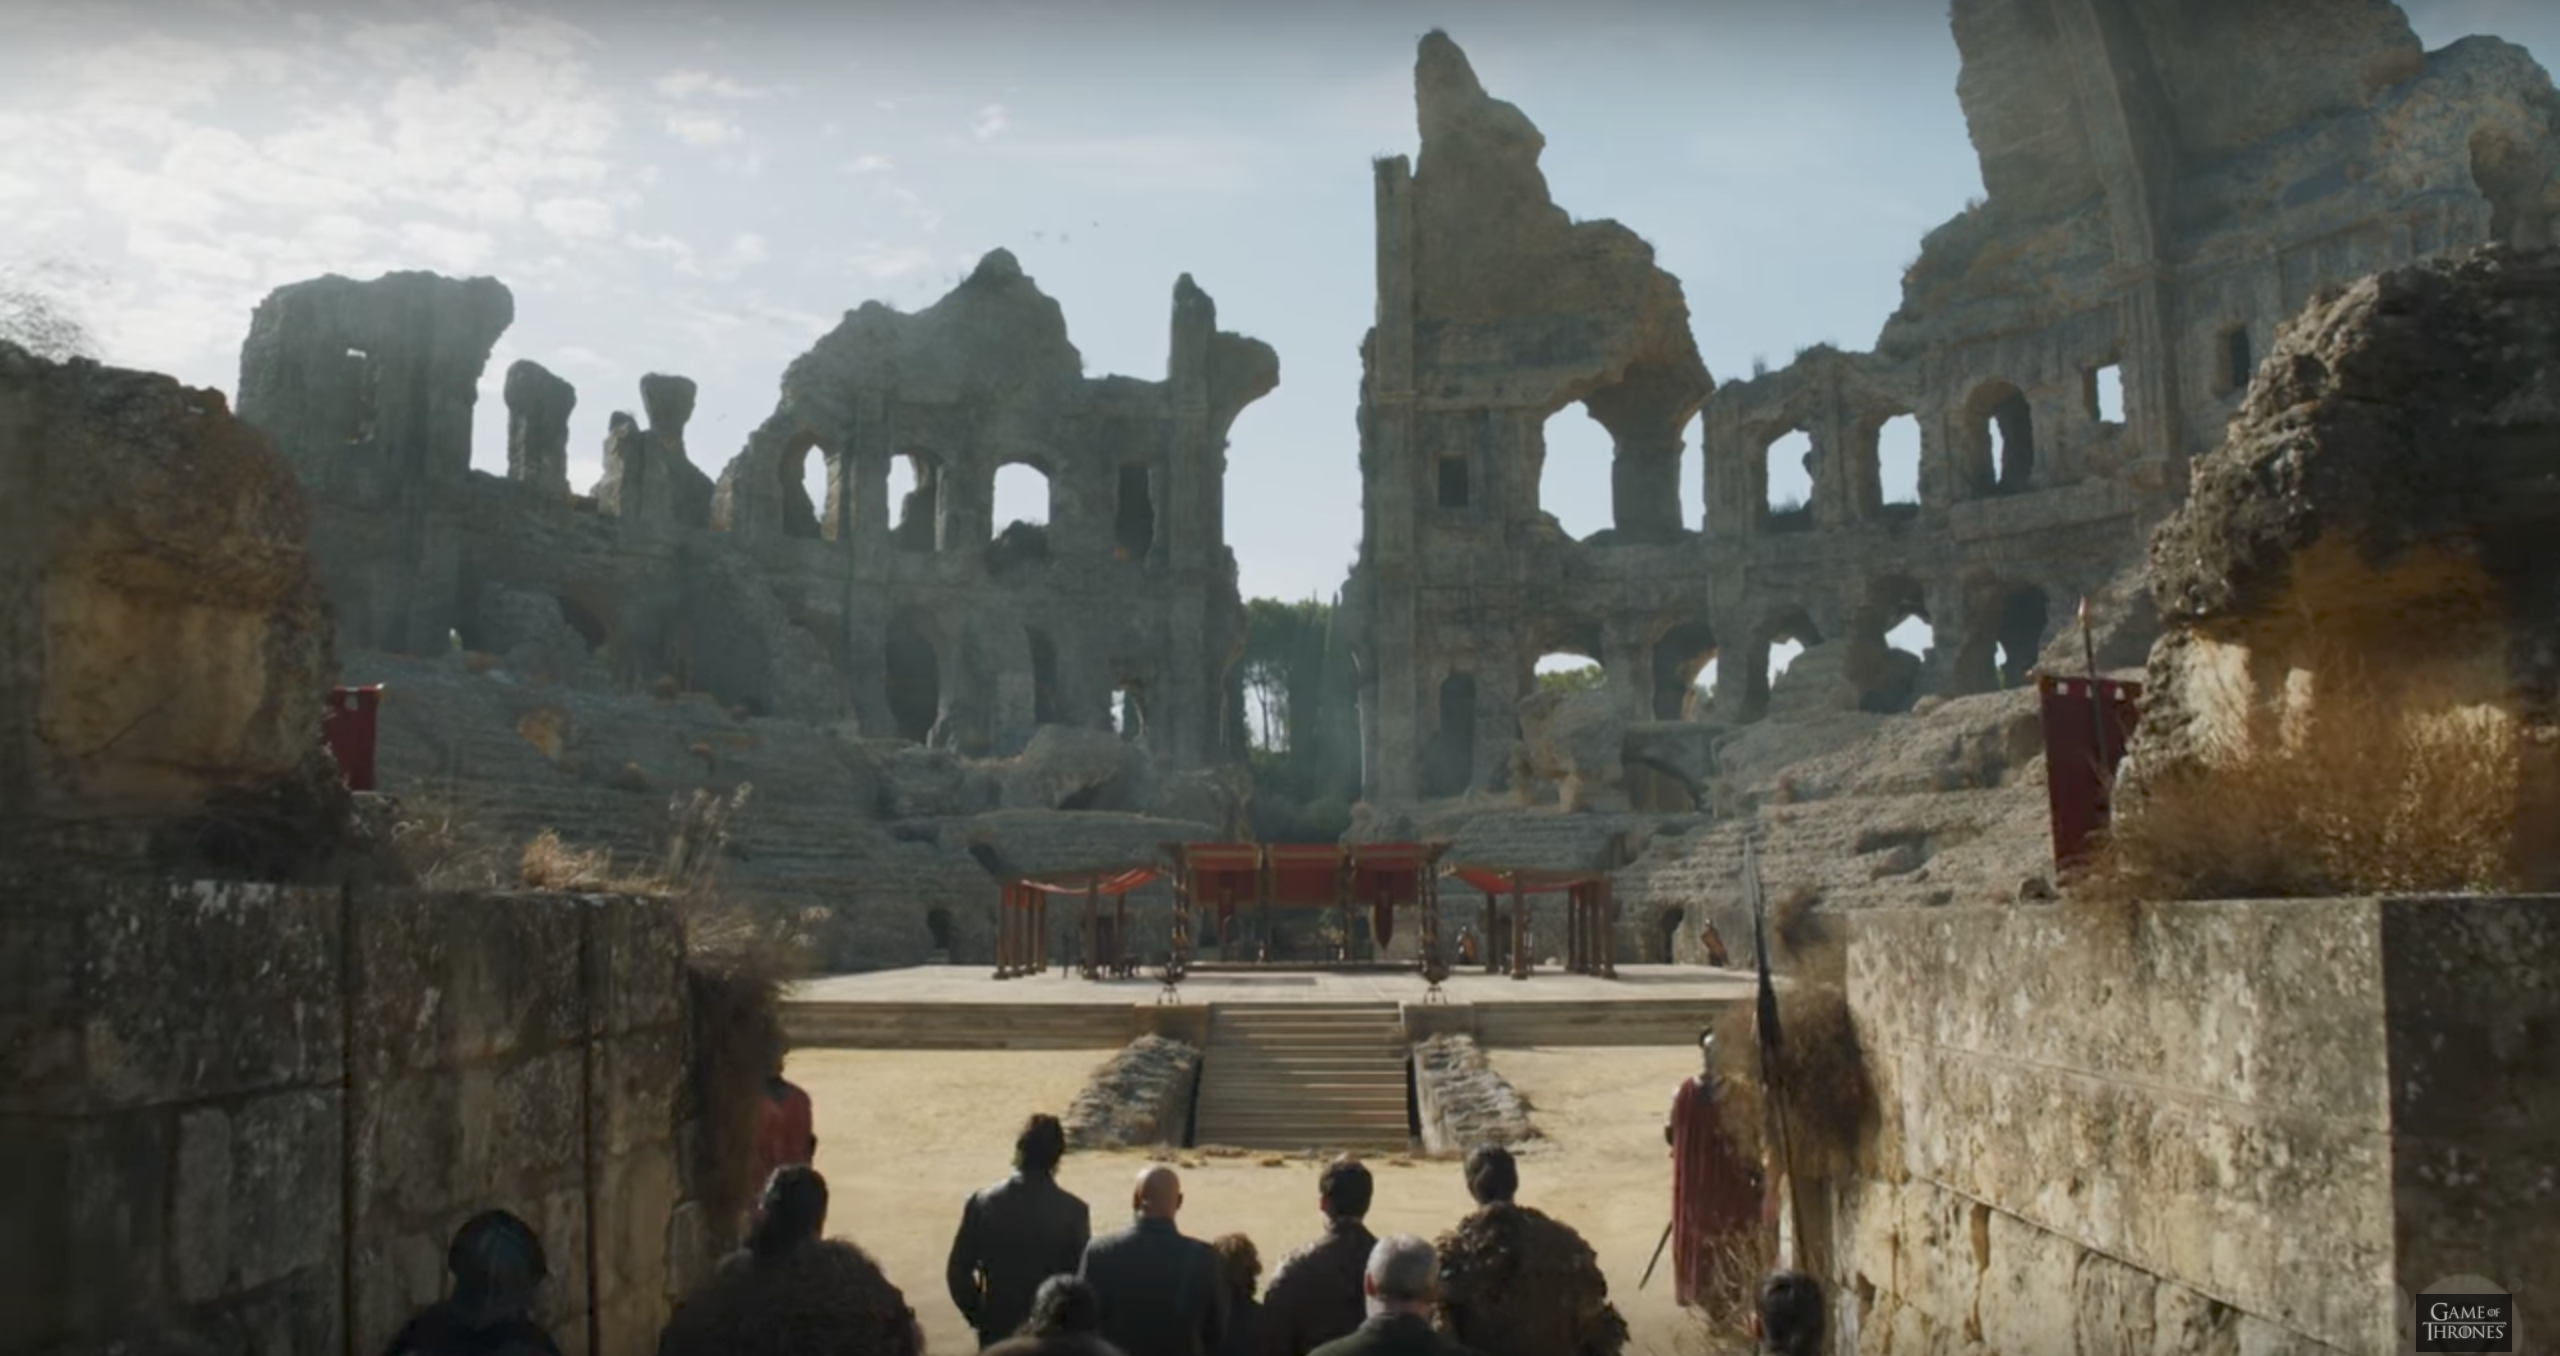 Image result for image of DRAGONPIT IN GAME OF THRONES